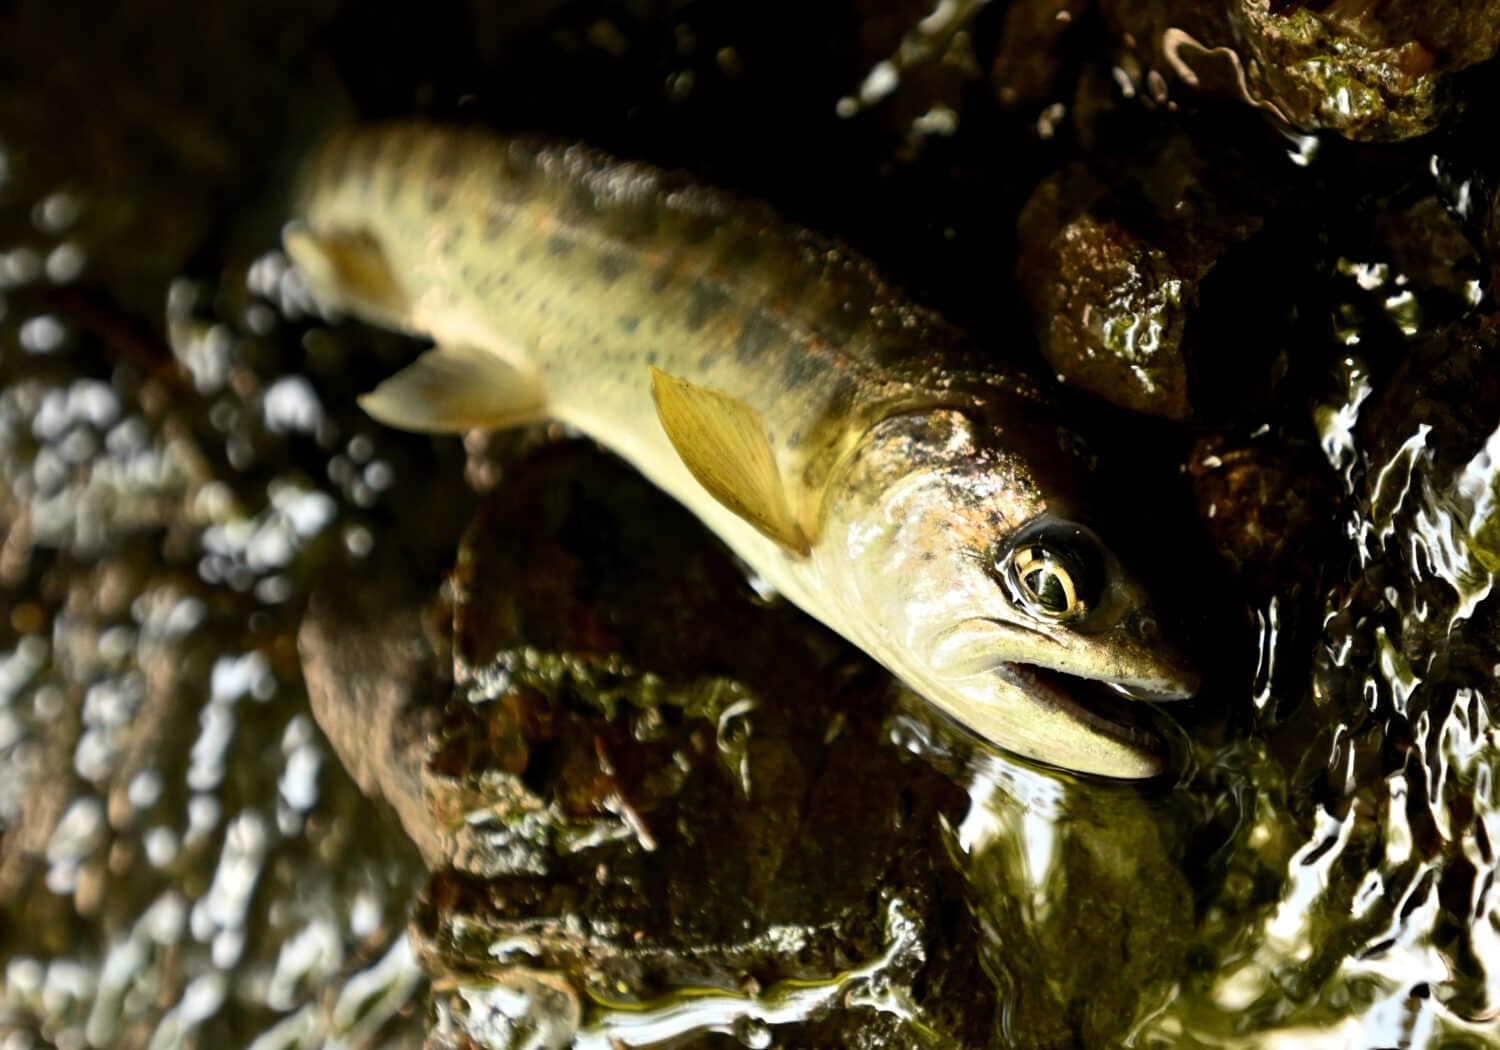 Mountain stream fish 'Amago' in early spring.